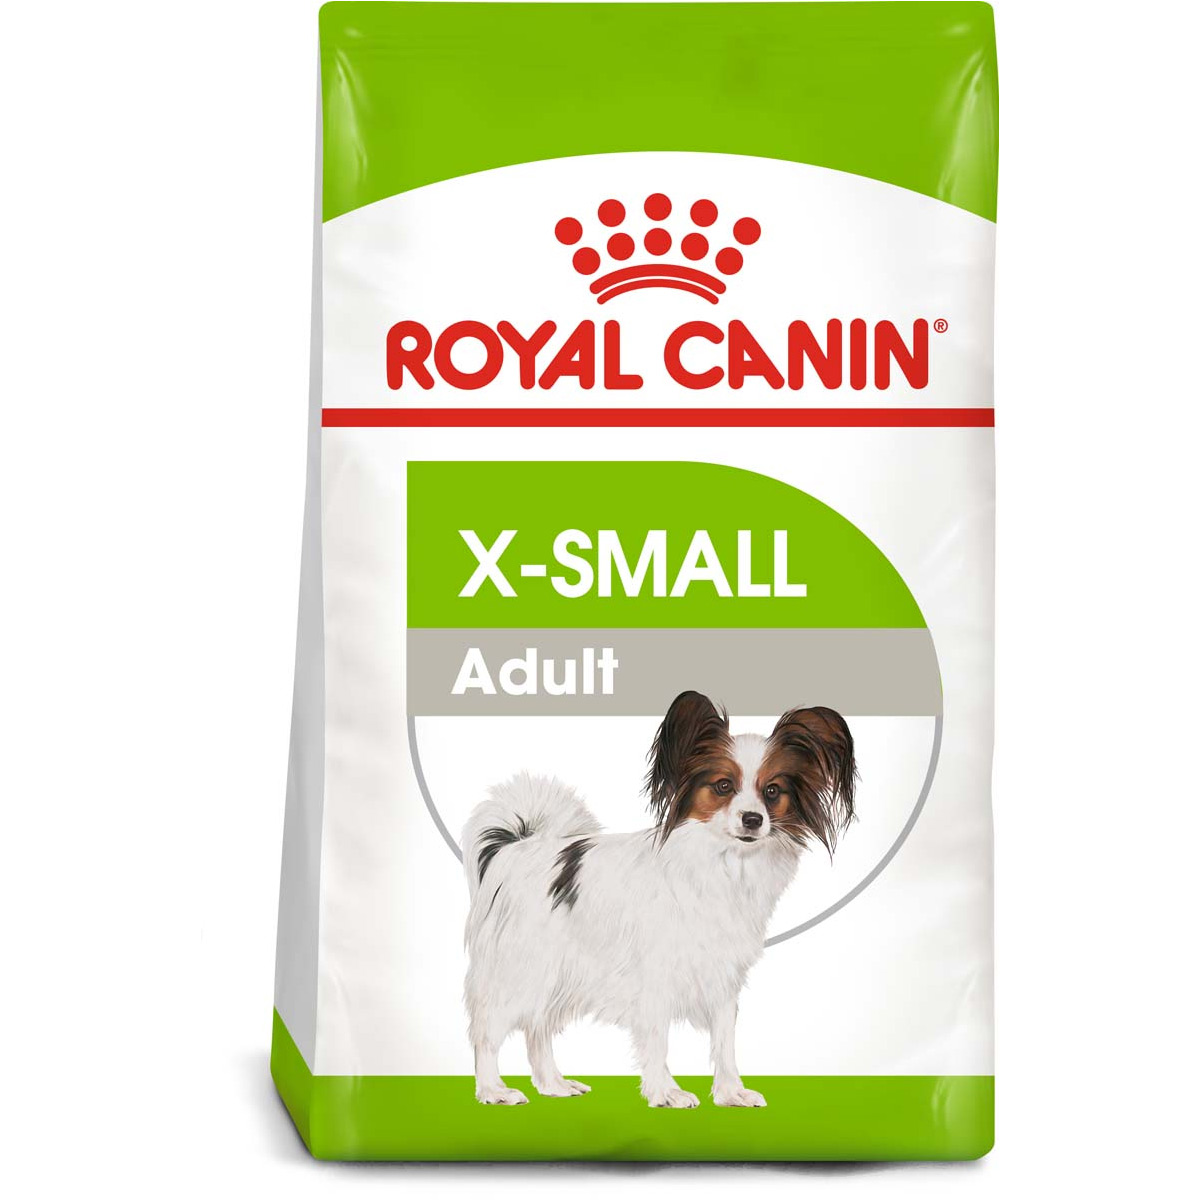 ROYAL CANIN X-SMALL Adult 3 kg